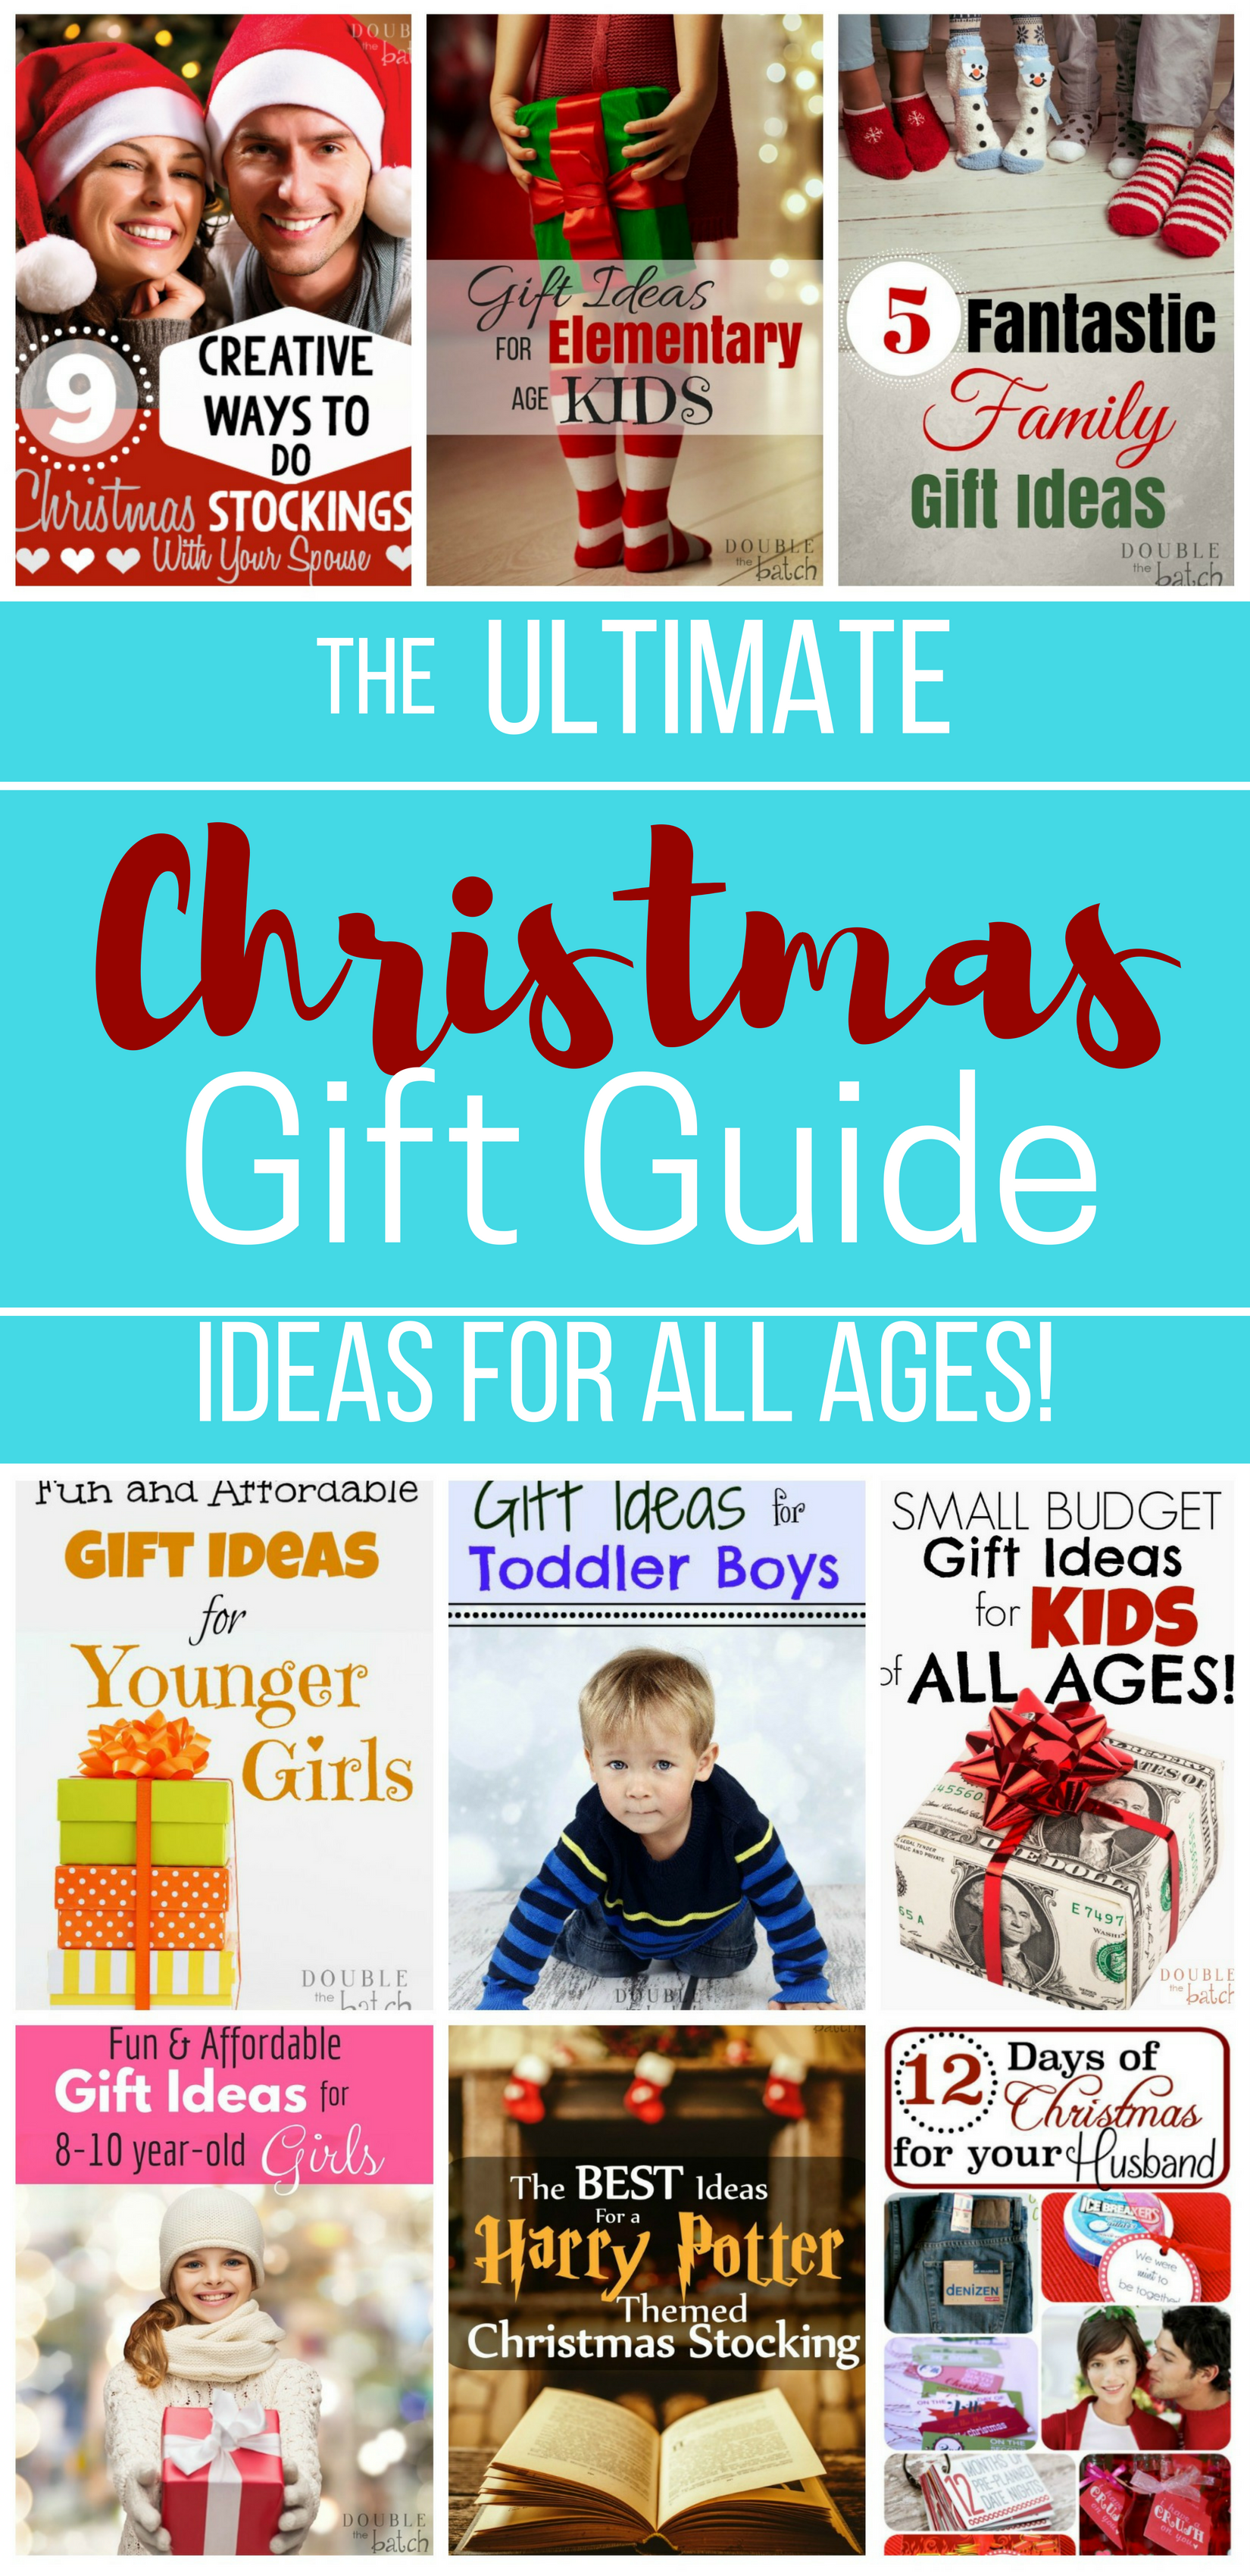 The ultimate gift guide for christmas - Ideas for all ages!